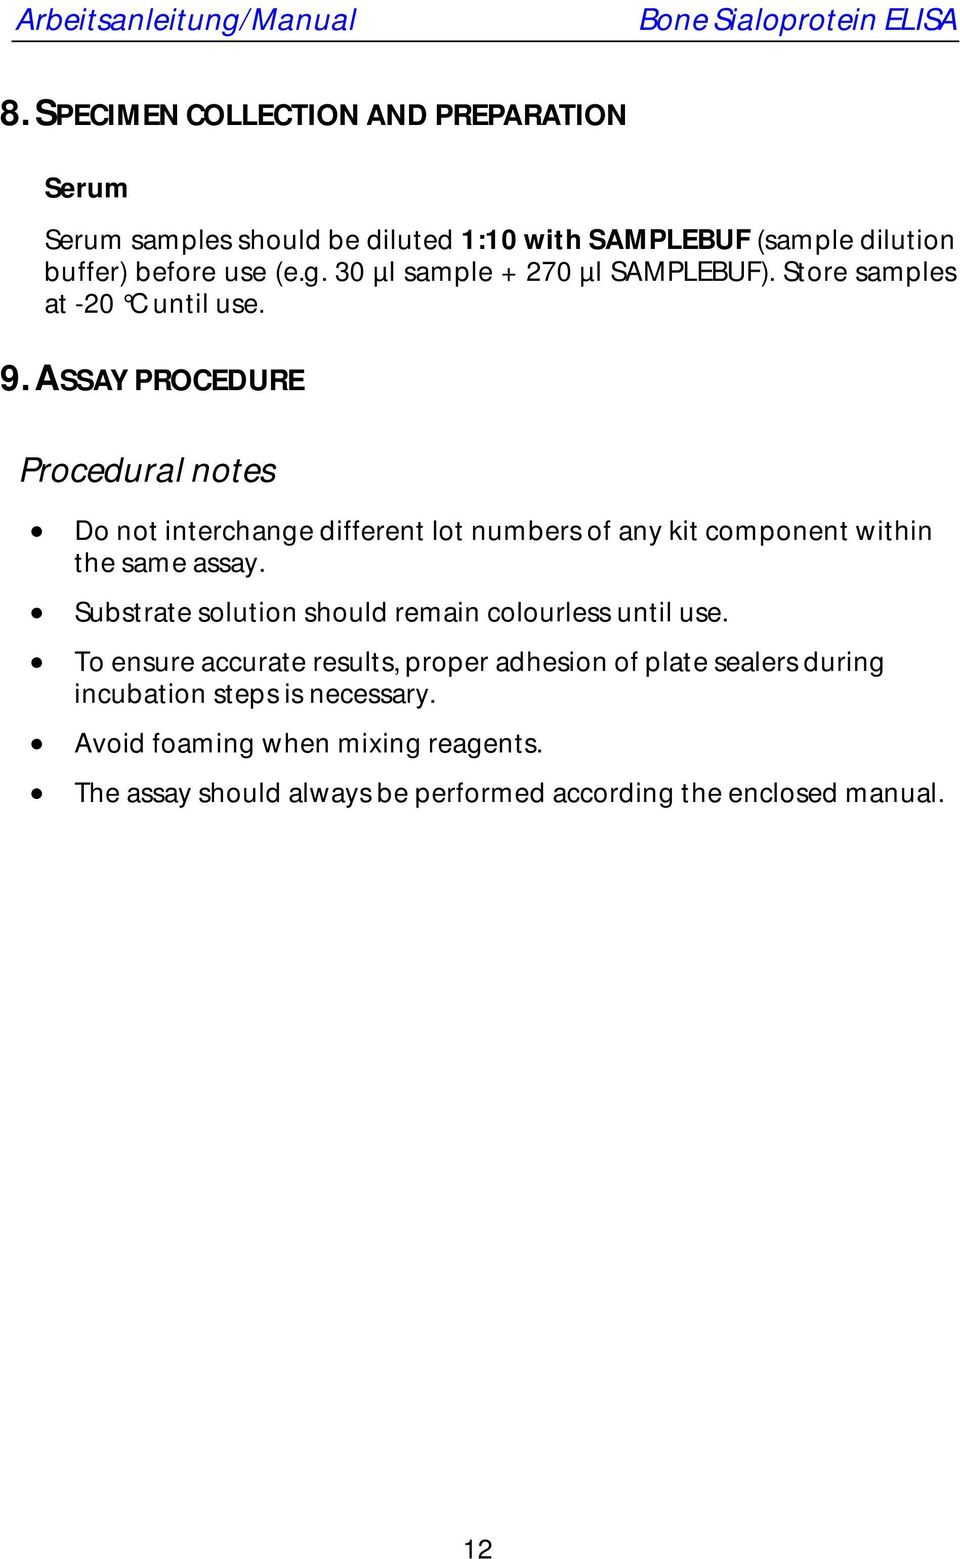 ASSAY PROCEDURE Procedural notes Do not interchange different lot numbers of any kit component within the same assay.